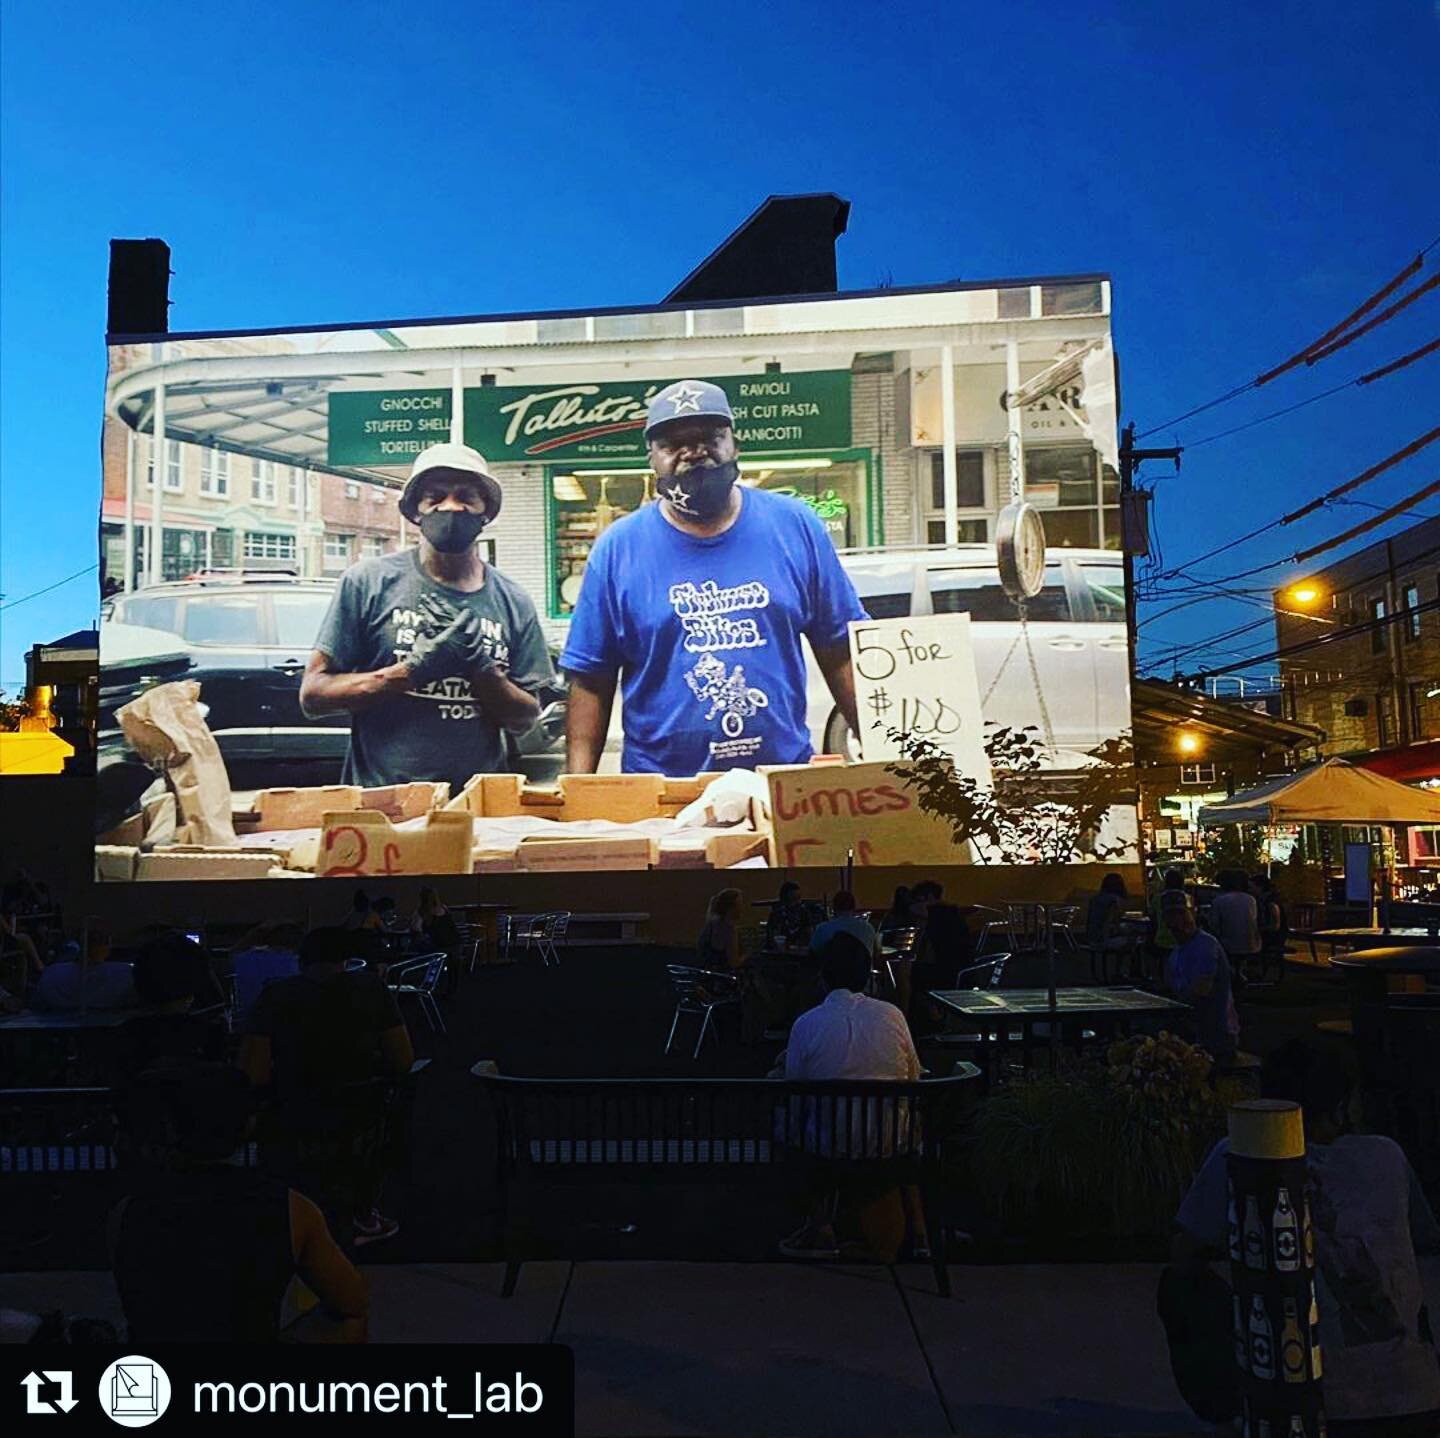 V&iacute;a @monument_lab
・・・
Last night&rsquo;s projections on the site of the former Rizzo mural wall in Philadelphia, marking a month since its removal.

According to organizers: &ldquo;We are projecting images at the 9th Street Market to visually 